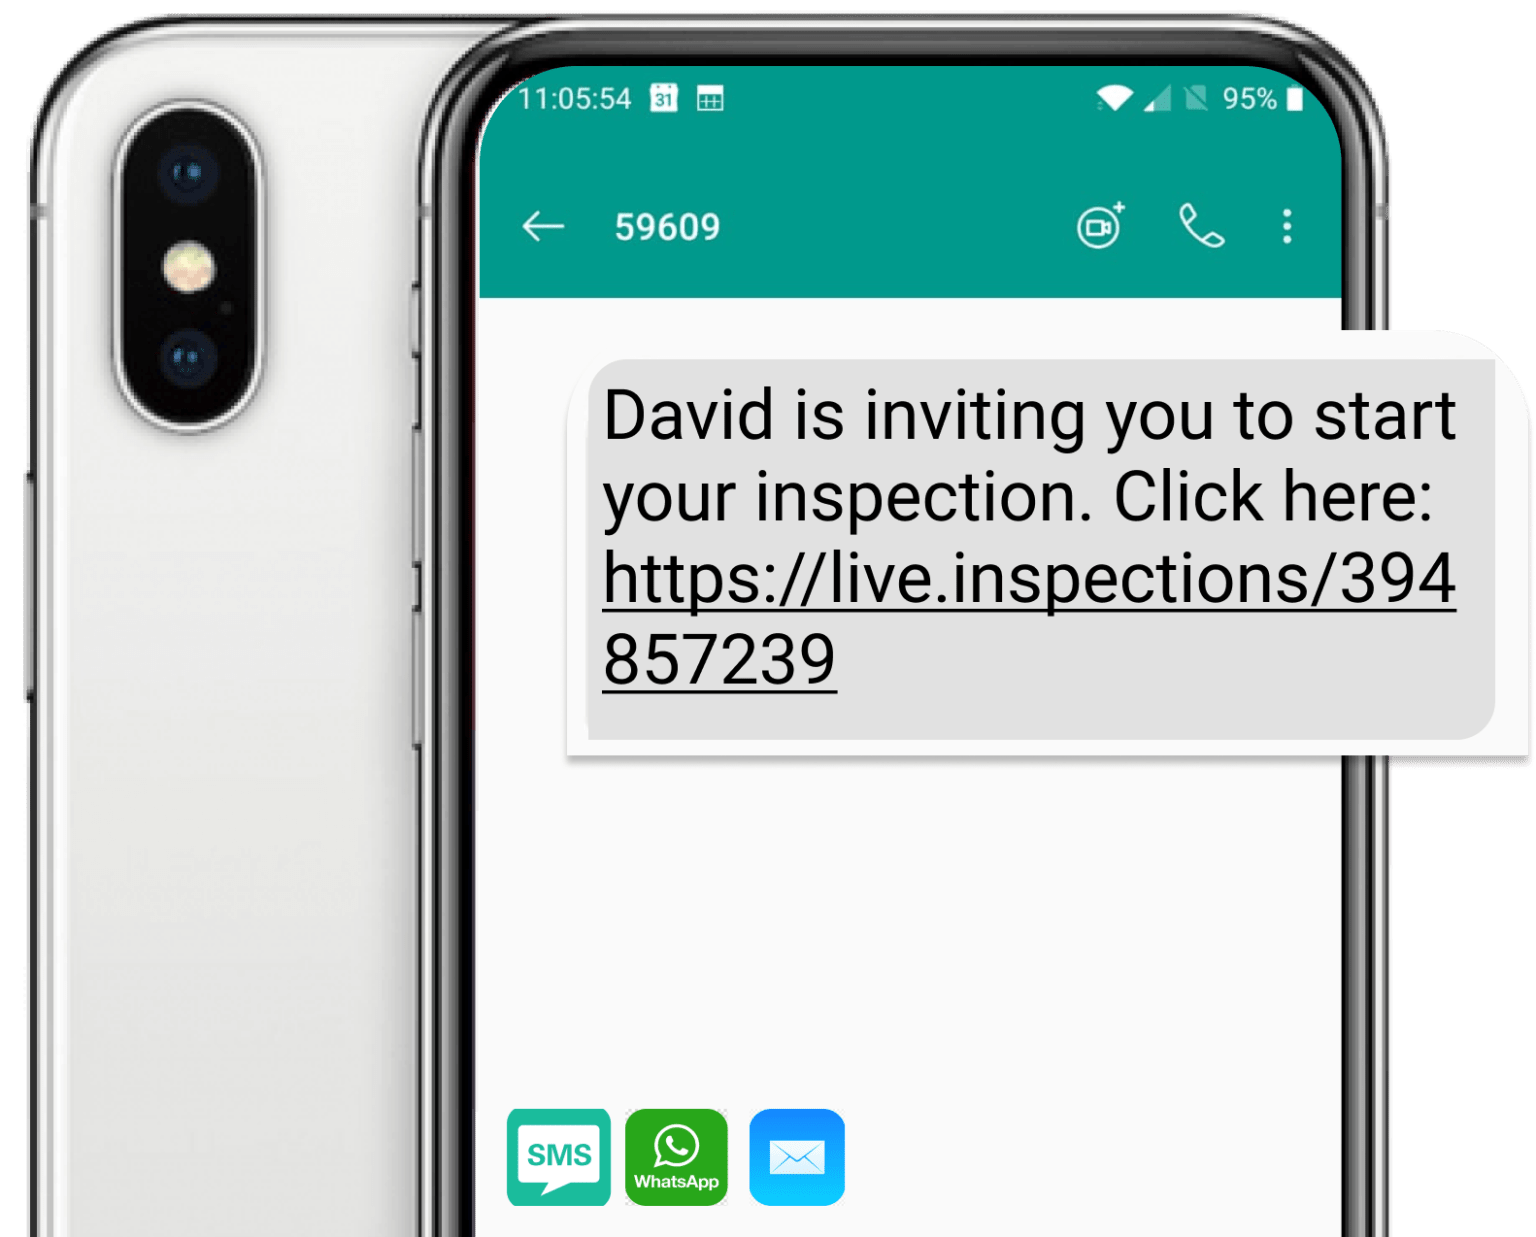 Invite-to-live-inspection-1-1536x1237-1